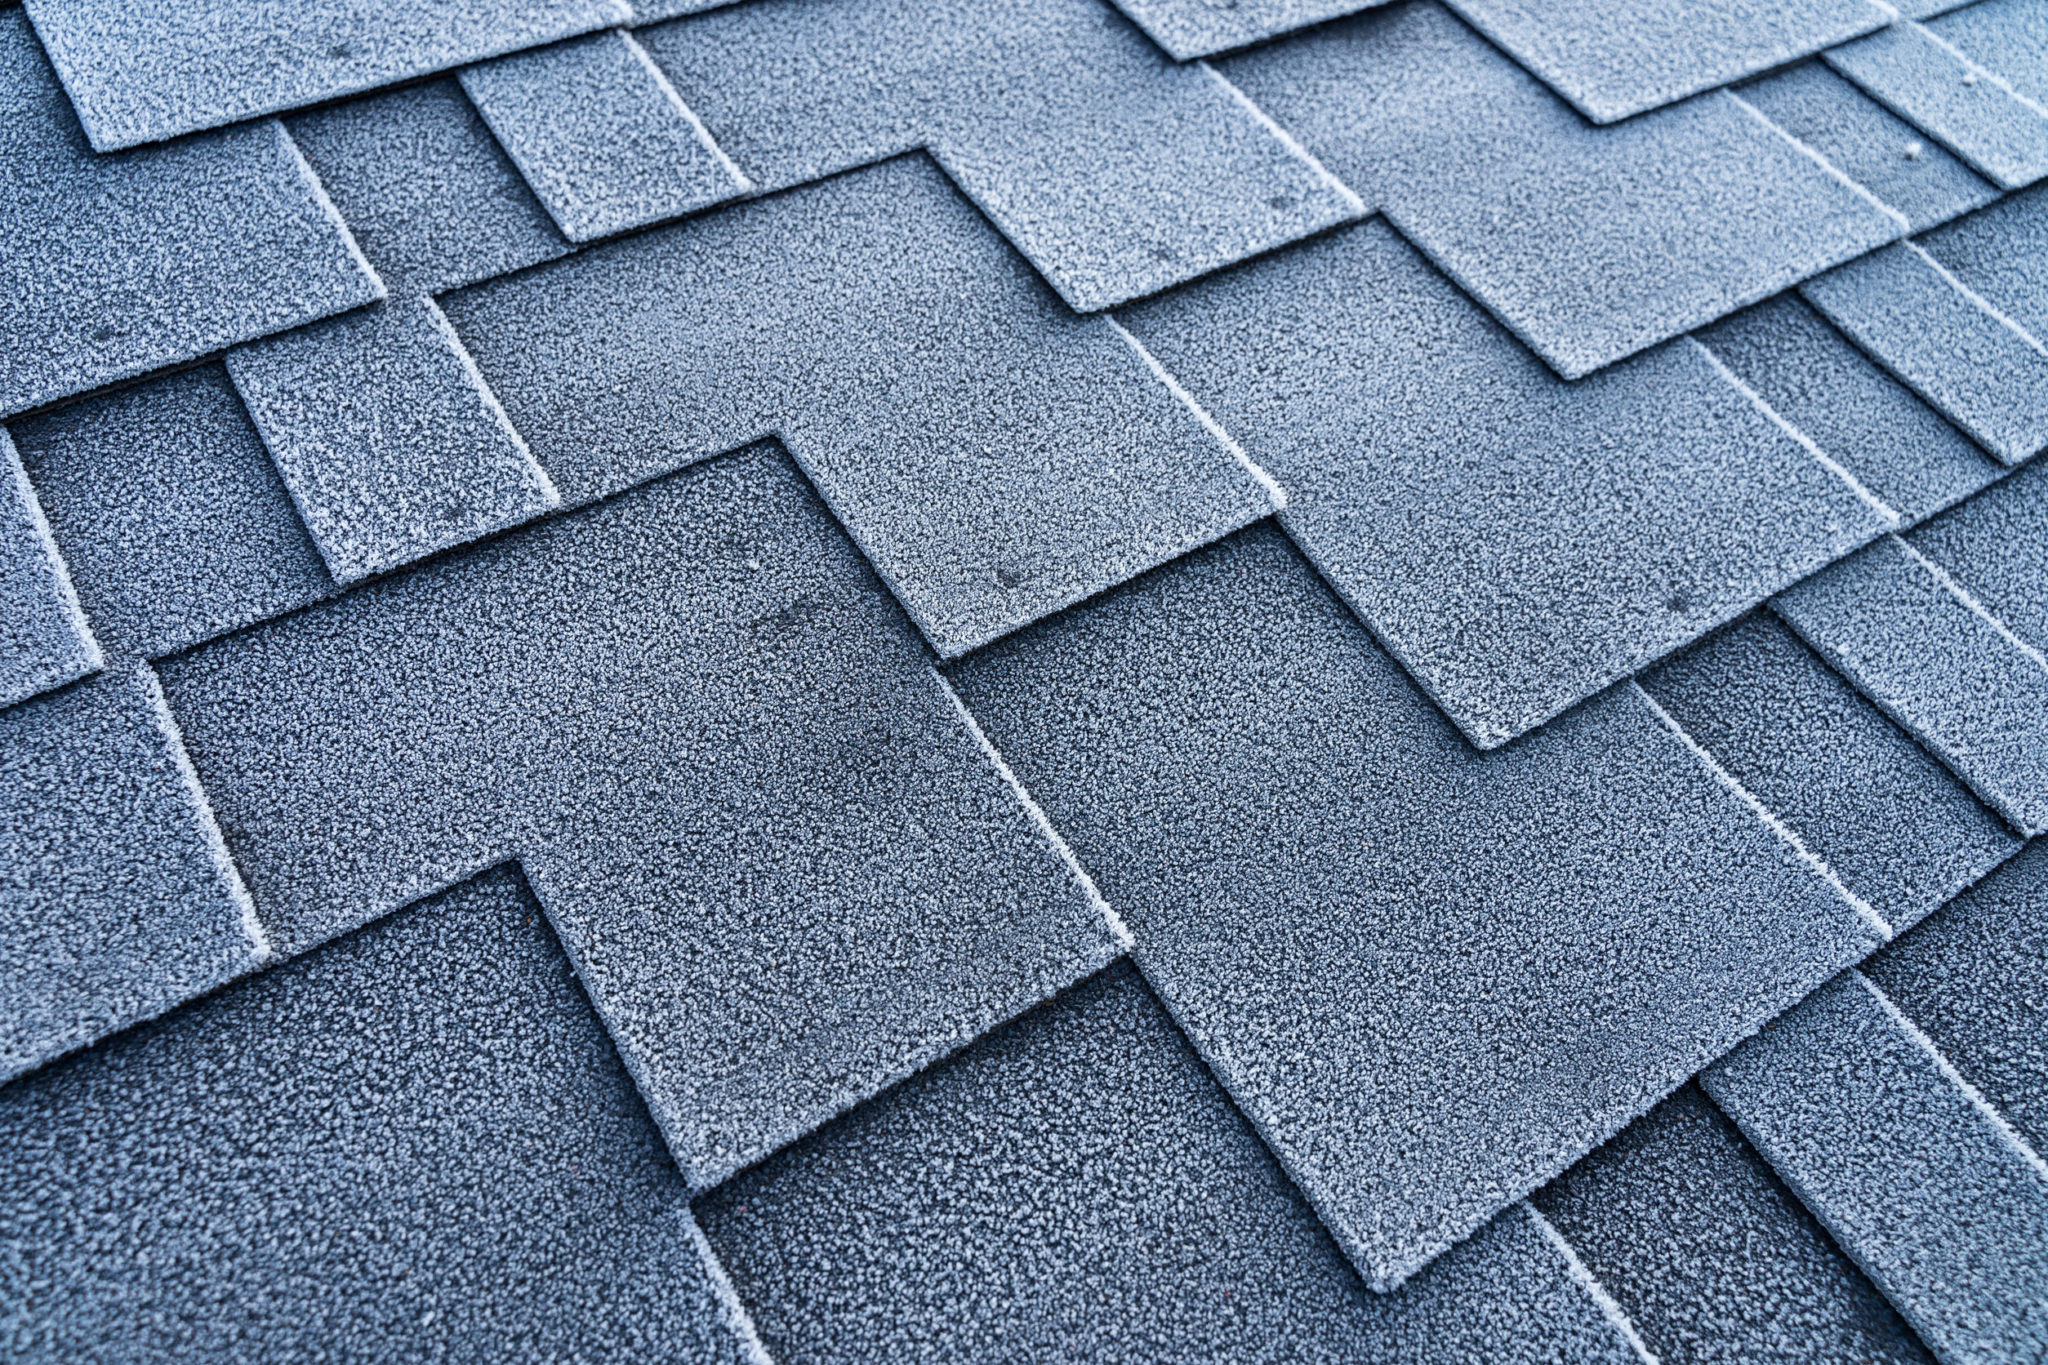 different roofing materials